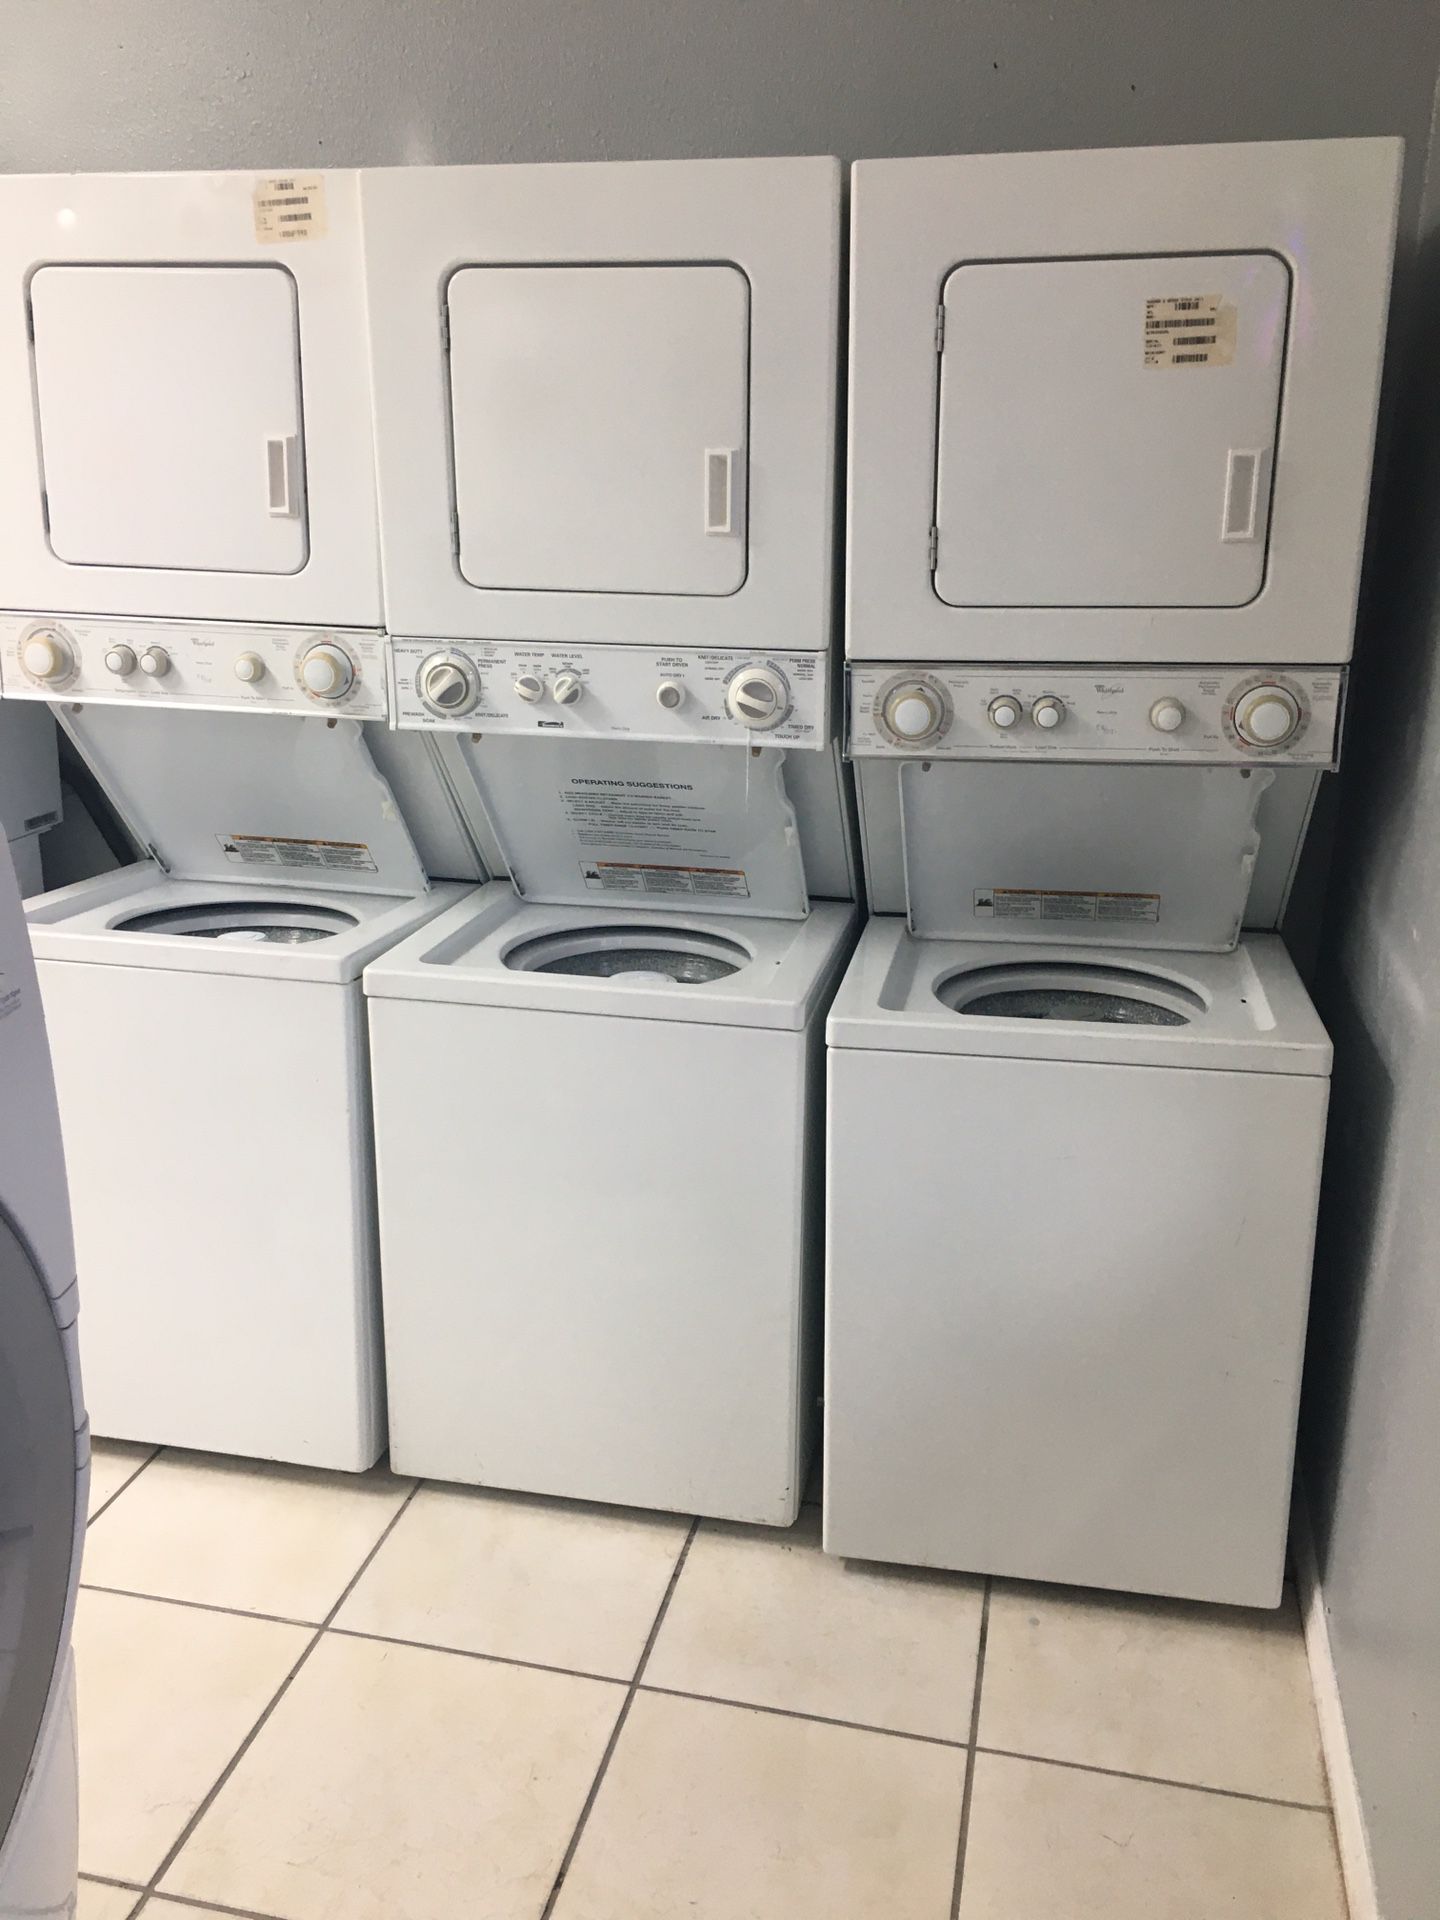 24 inch wide washer dryer combo $39 down and get it home today